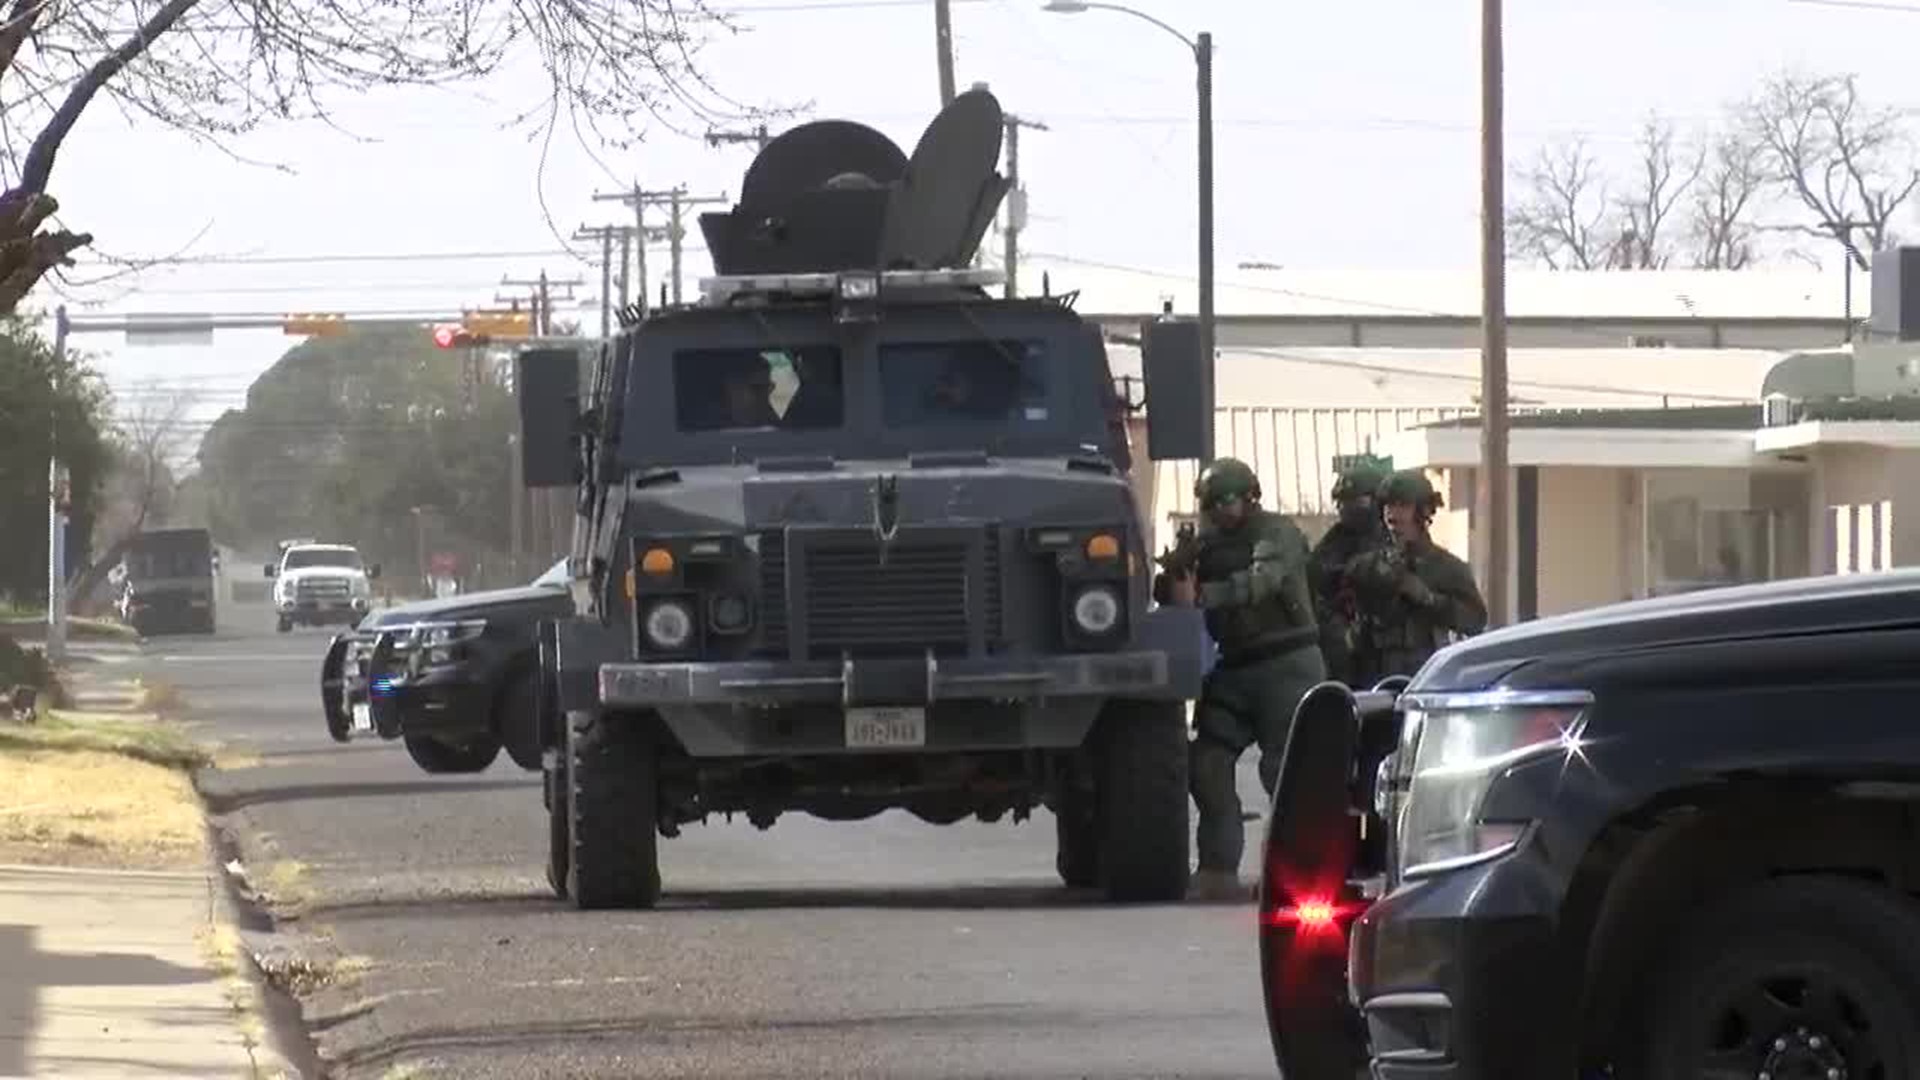 VIDEO: SWAT, OPD responding to barricaded subject situation